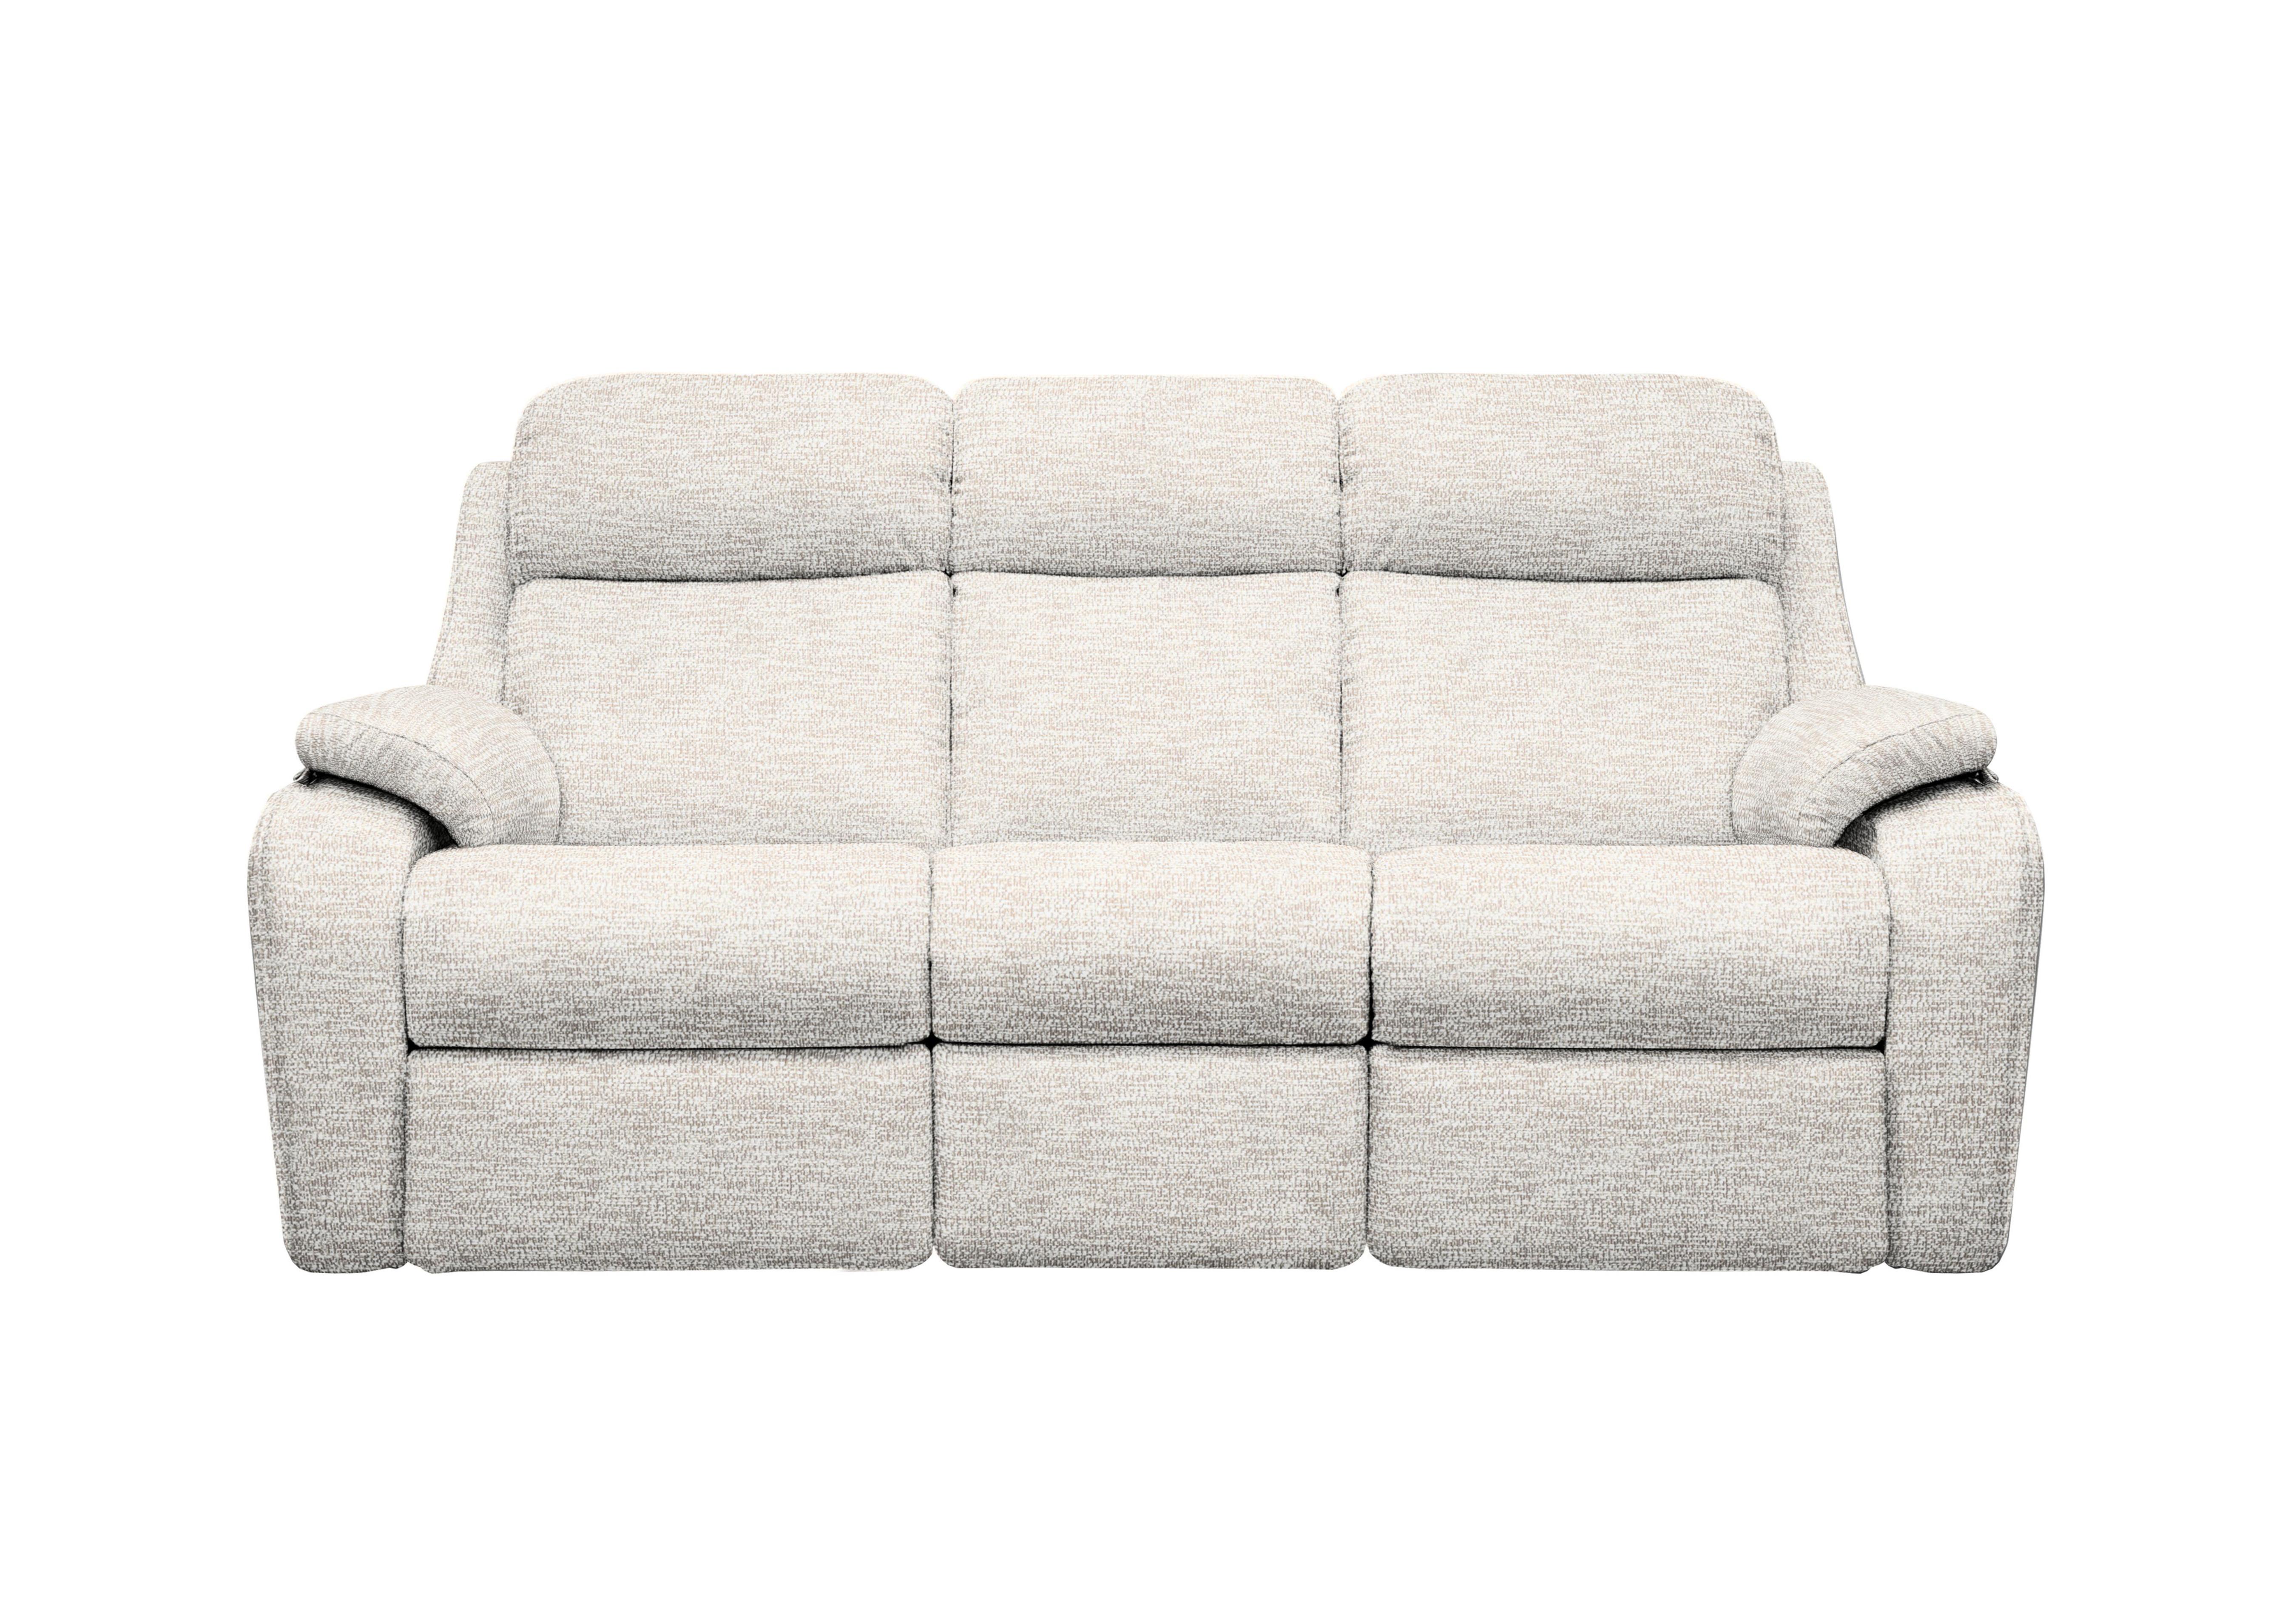 Kingsbury 3 Seater Fabric Power Recliner Sofa with Power Headrests in C931 Rush Cream on Furniture Village